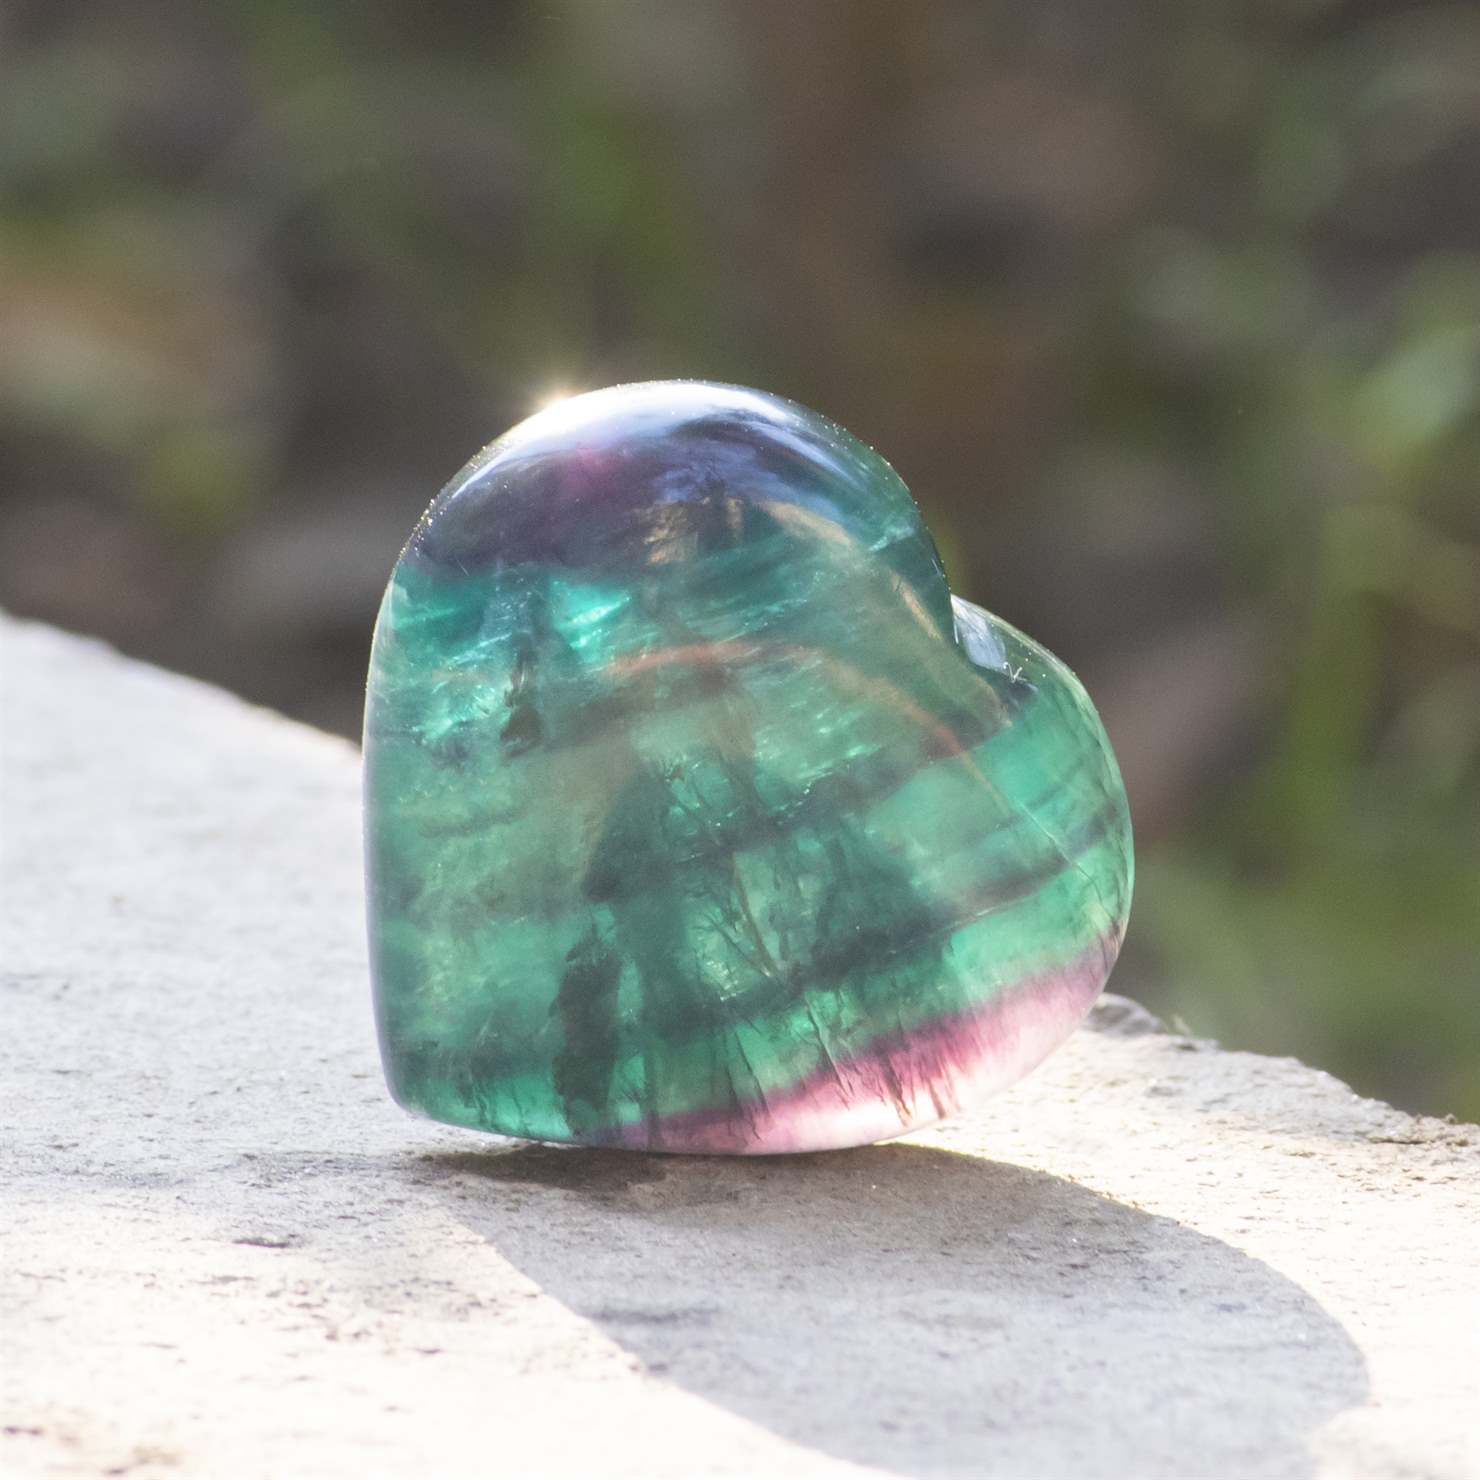 Multi Fluorite Crystal Heart Shape Stone - Focus and Clarity - TheIndianHand